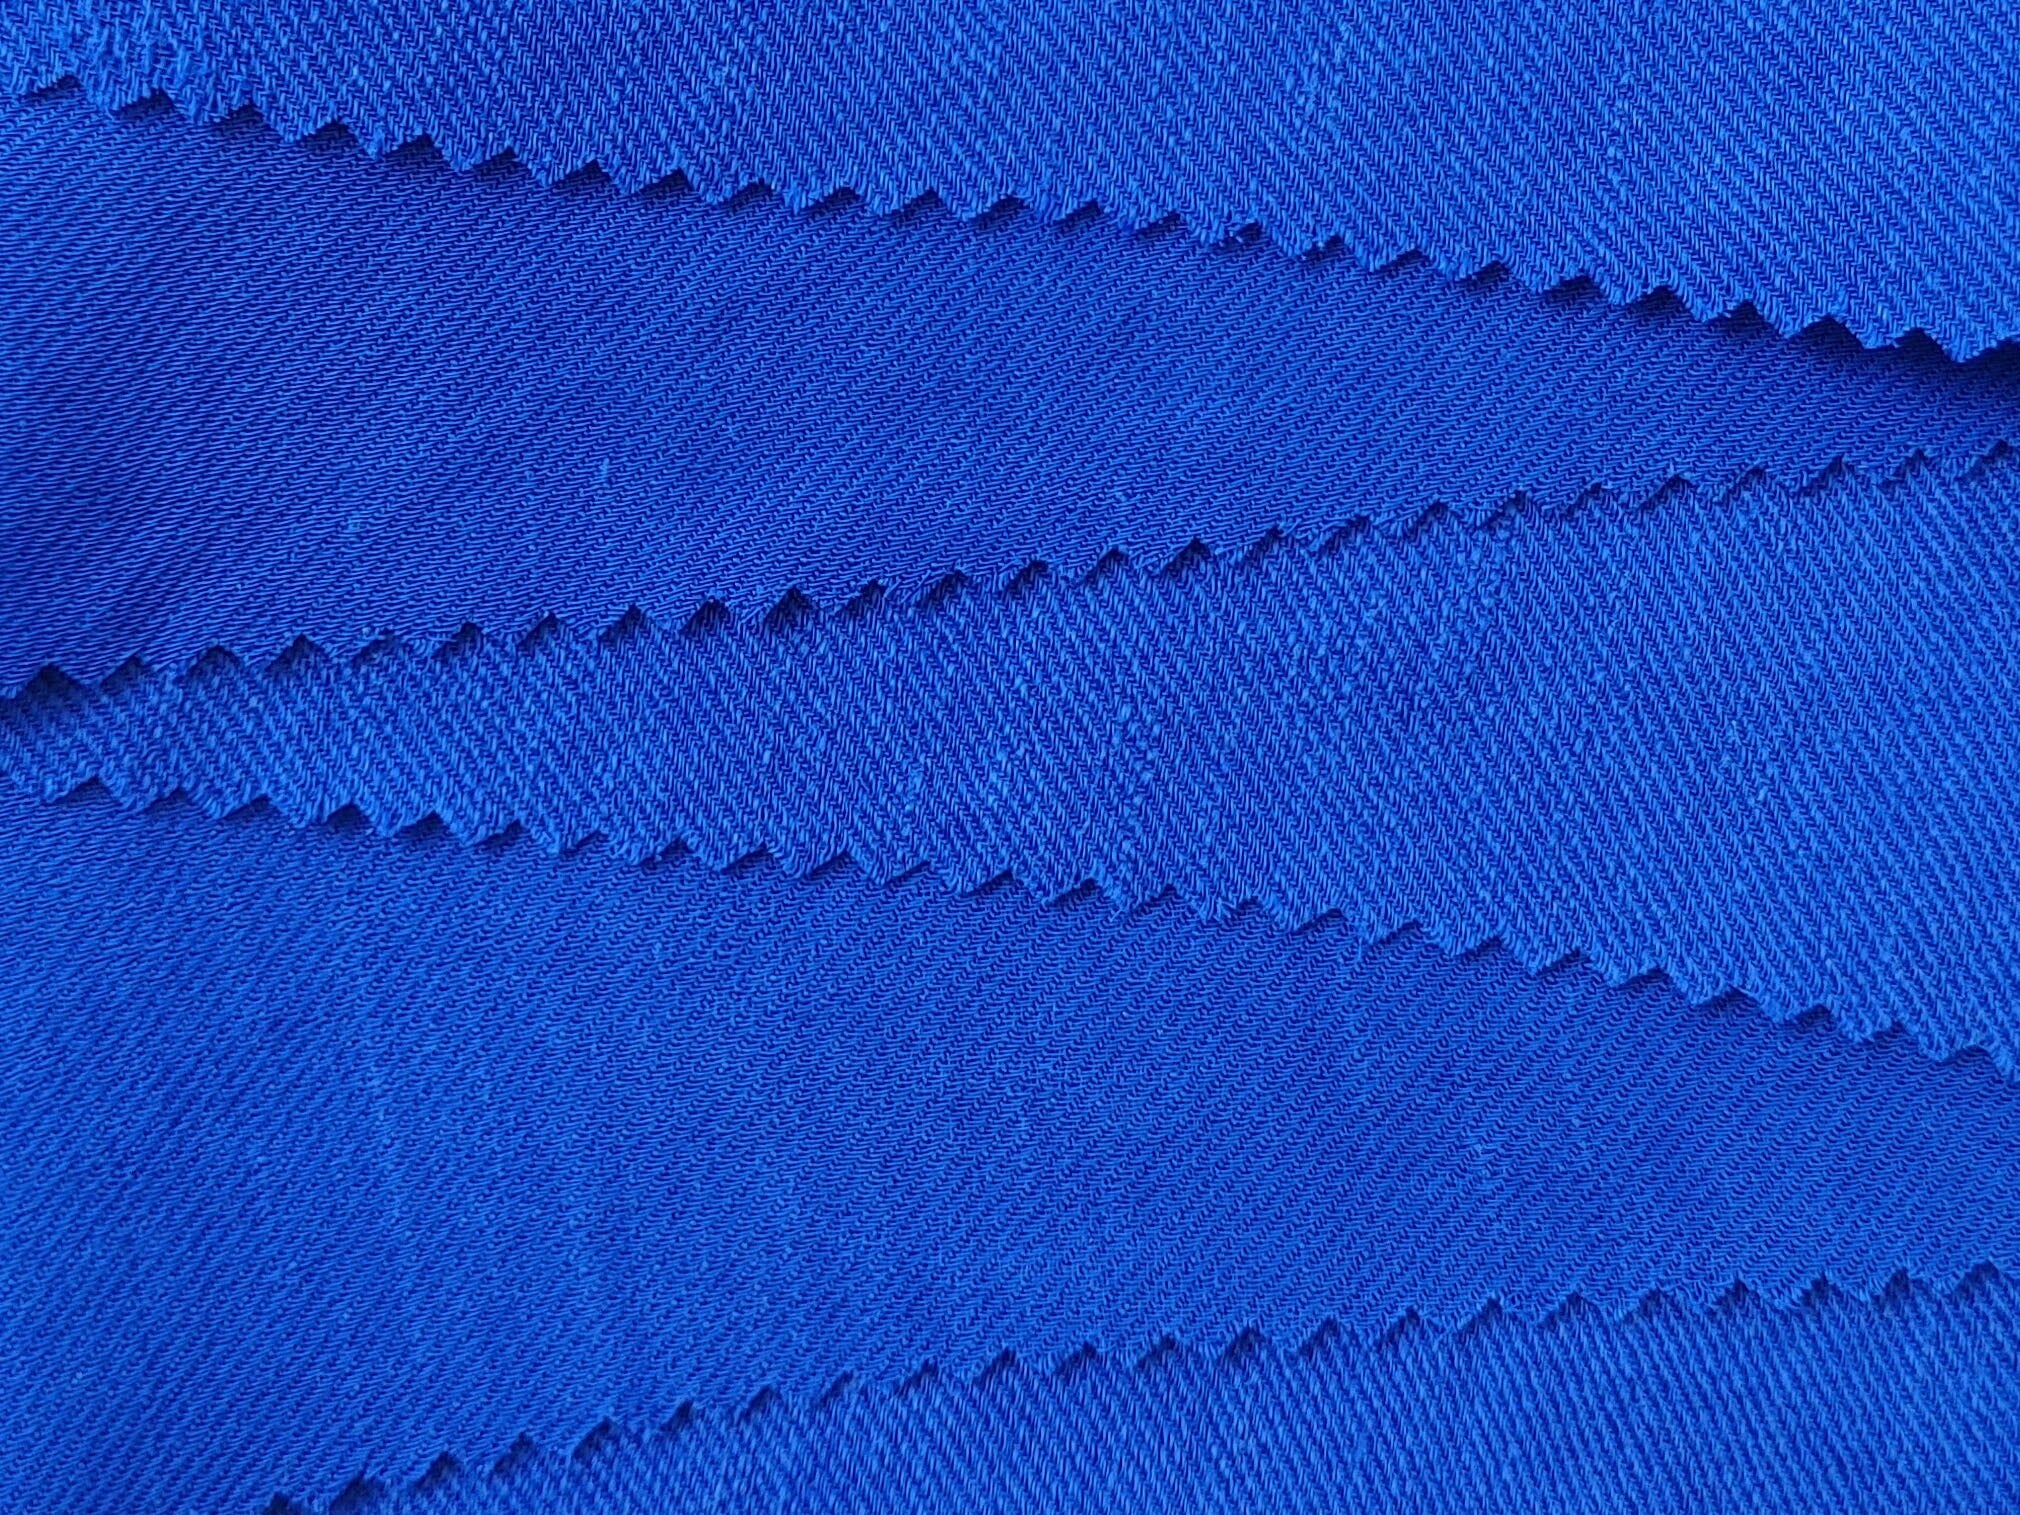 Elegance in Twill: Silky Linen Rayon Fabric with Good Drape 6032 6033 - The Linen Lab - Blue